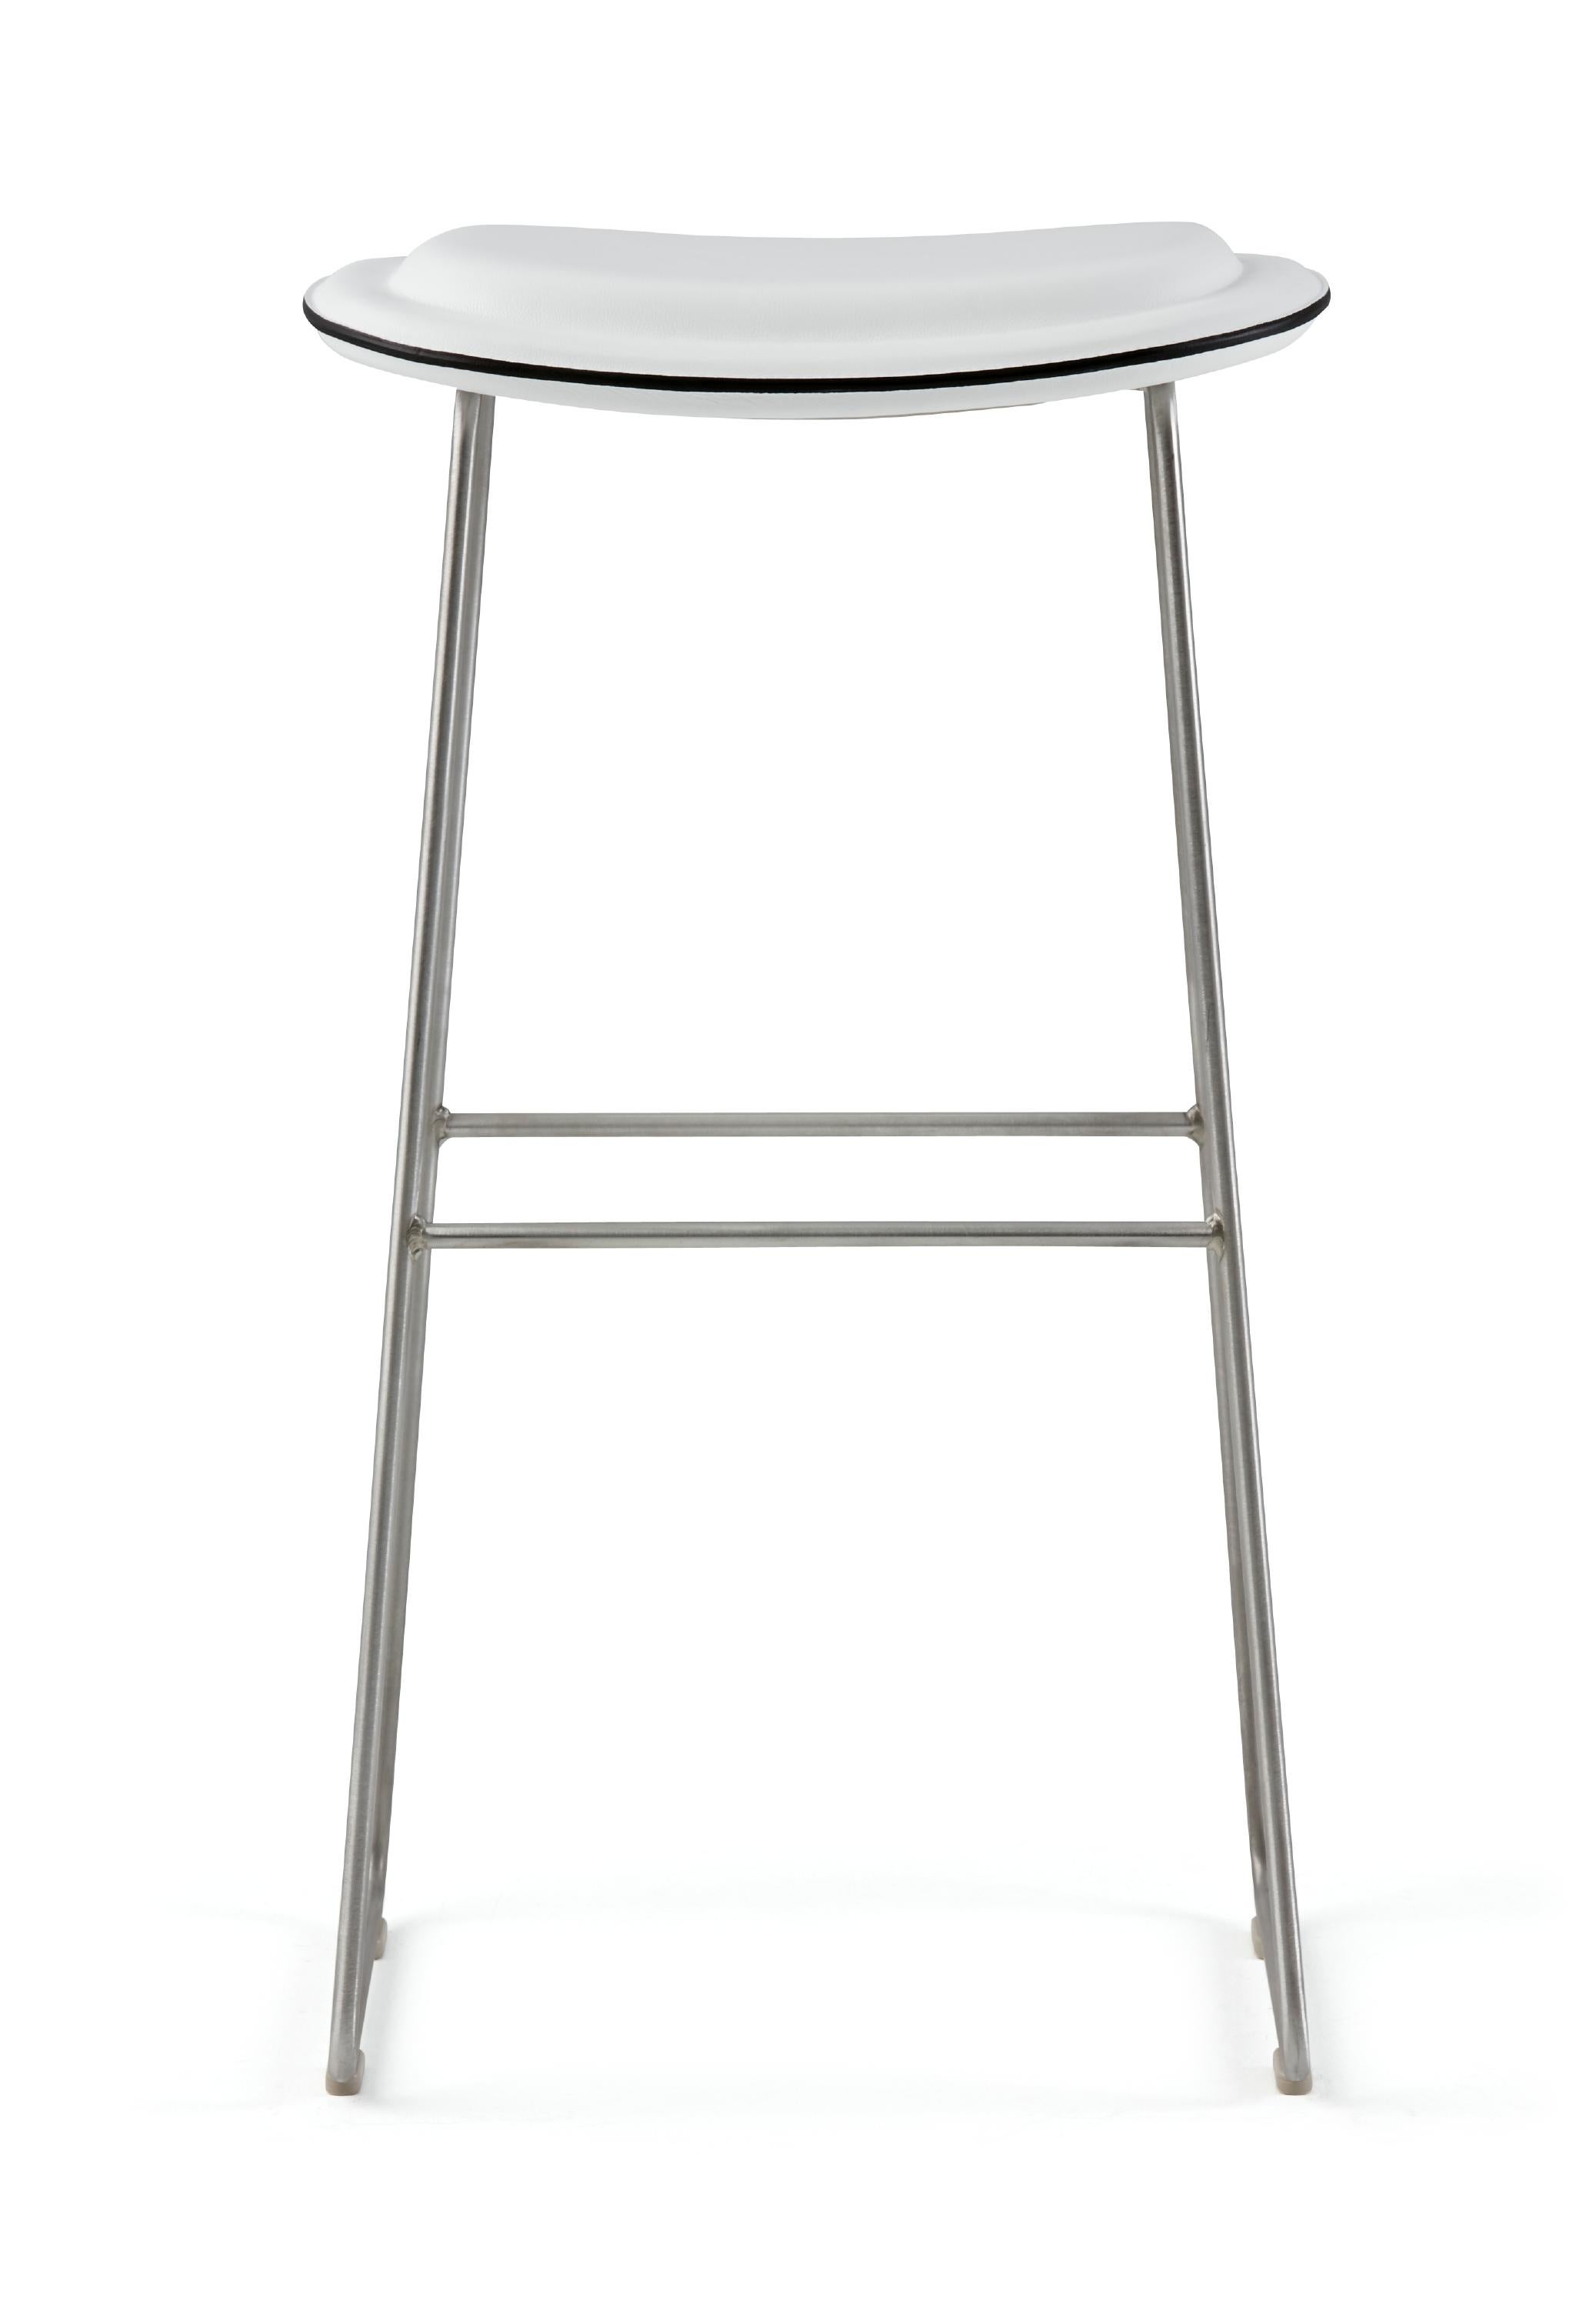 For Sale: White (Leather 900) Jasper Morrison Small Hi Pad Stool in Fabric or Leather Upholstery by Cappellini 2